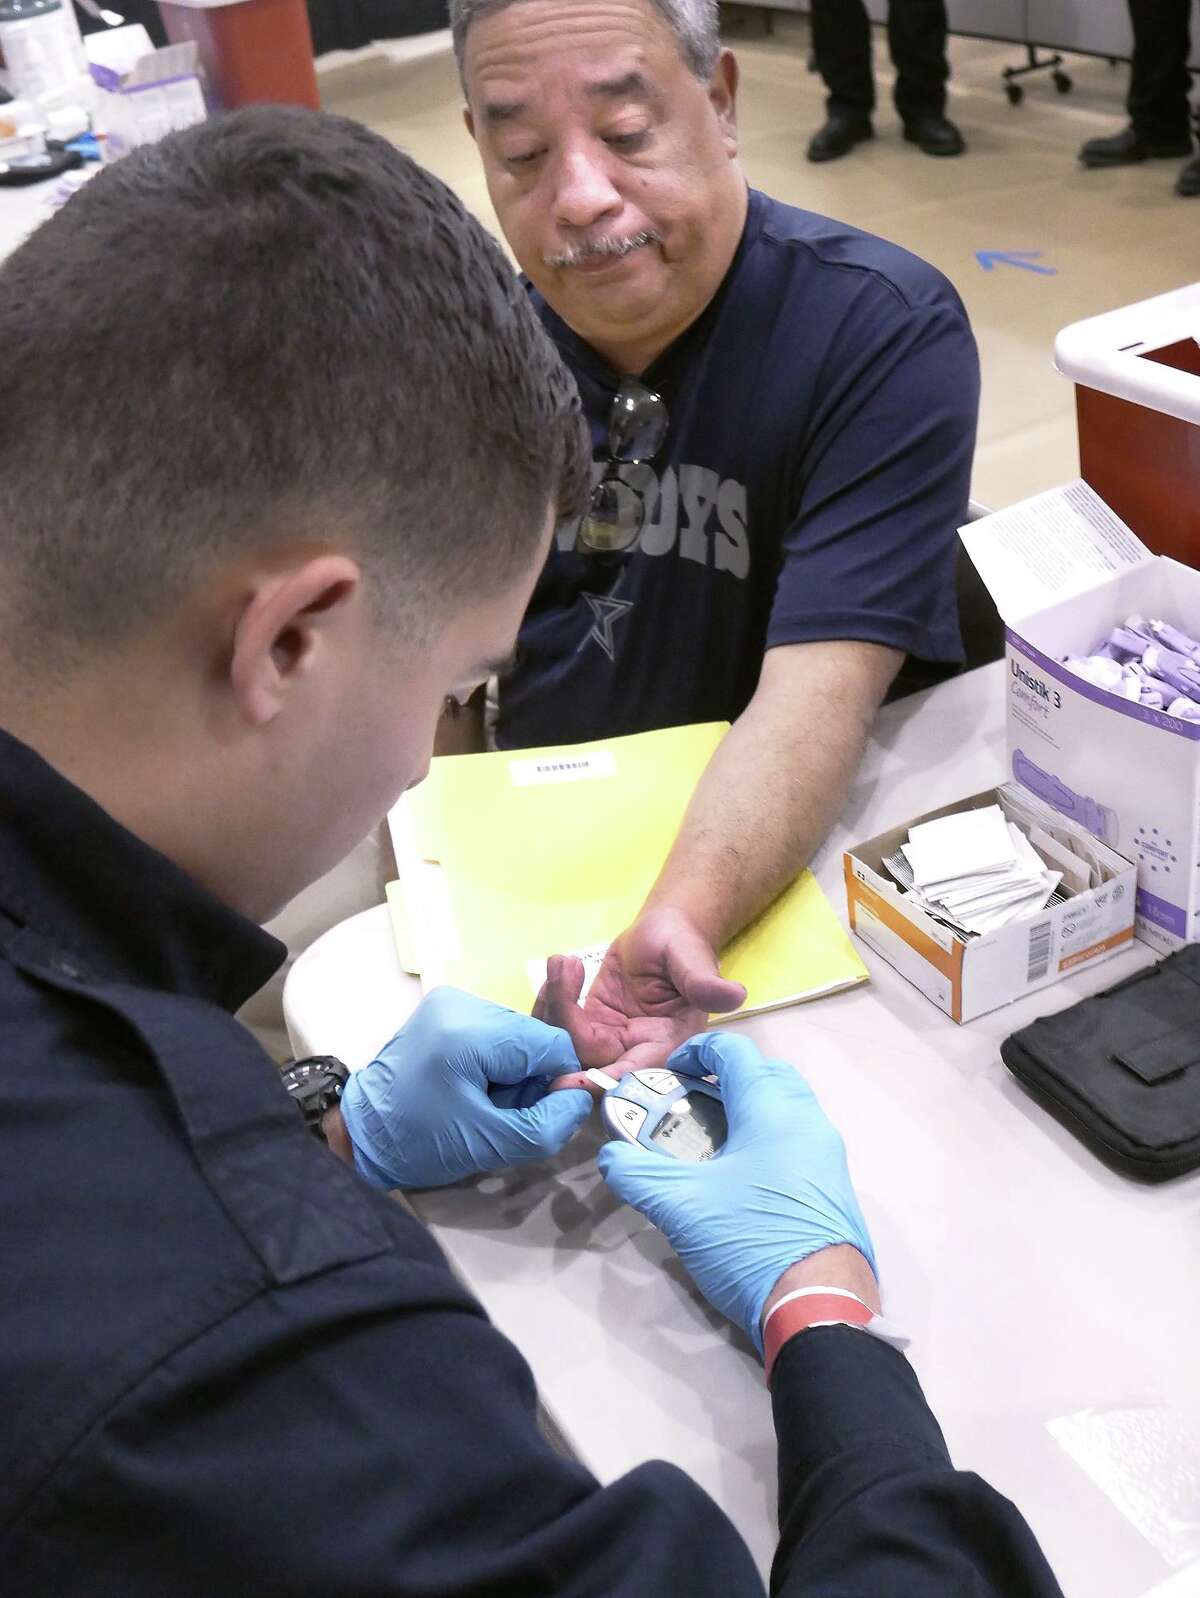 Laredoans took advantage of free medical screenings, immunizations for children and vision and dental care as Operation Lone Star 2019 was held last week at the United South High School Ninth Grade Campus.